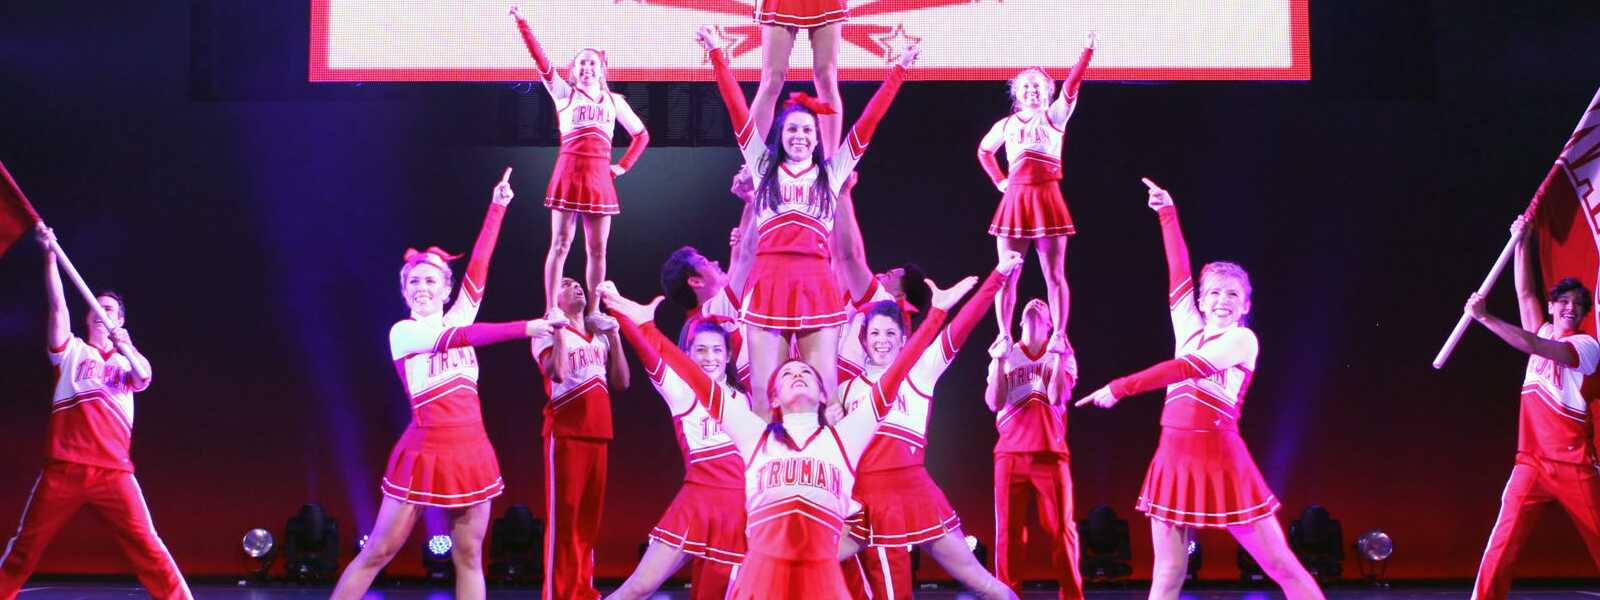 Buy premium VIP cheap Tickets For Bring it On the musical in West End 